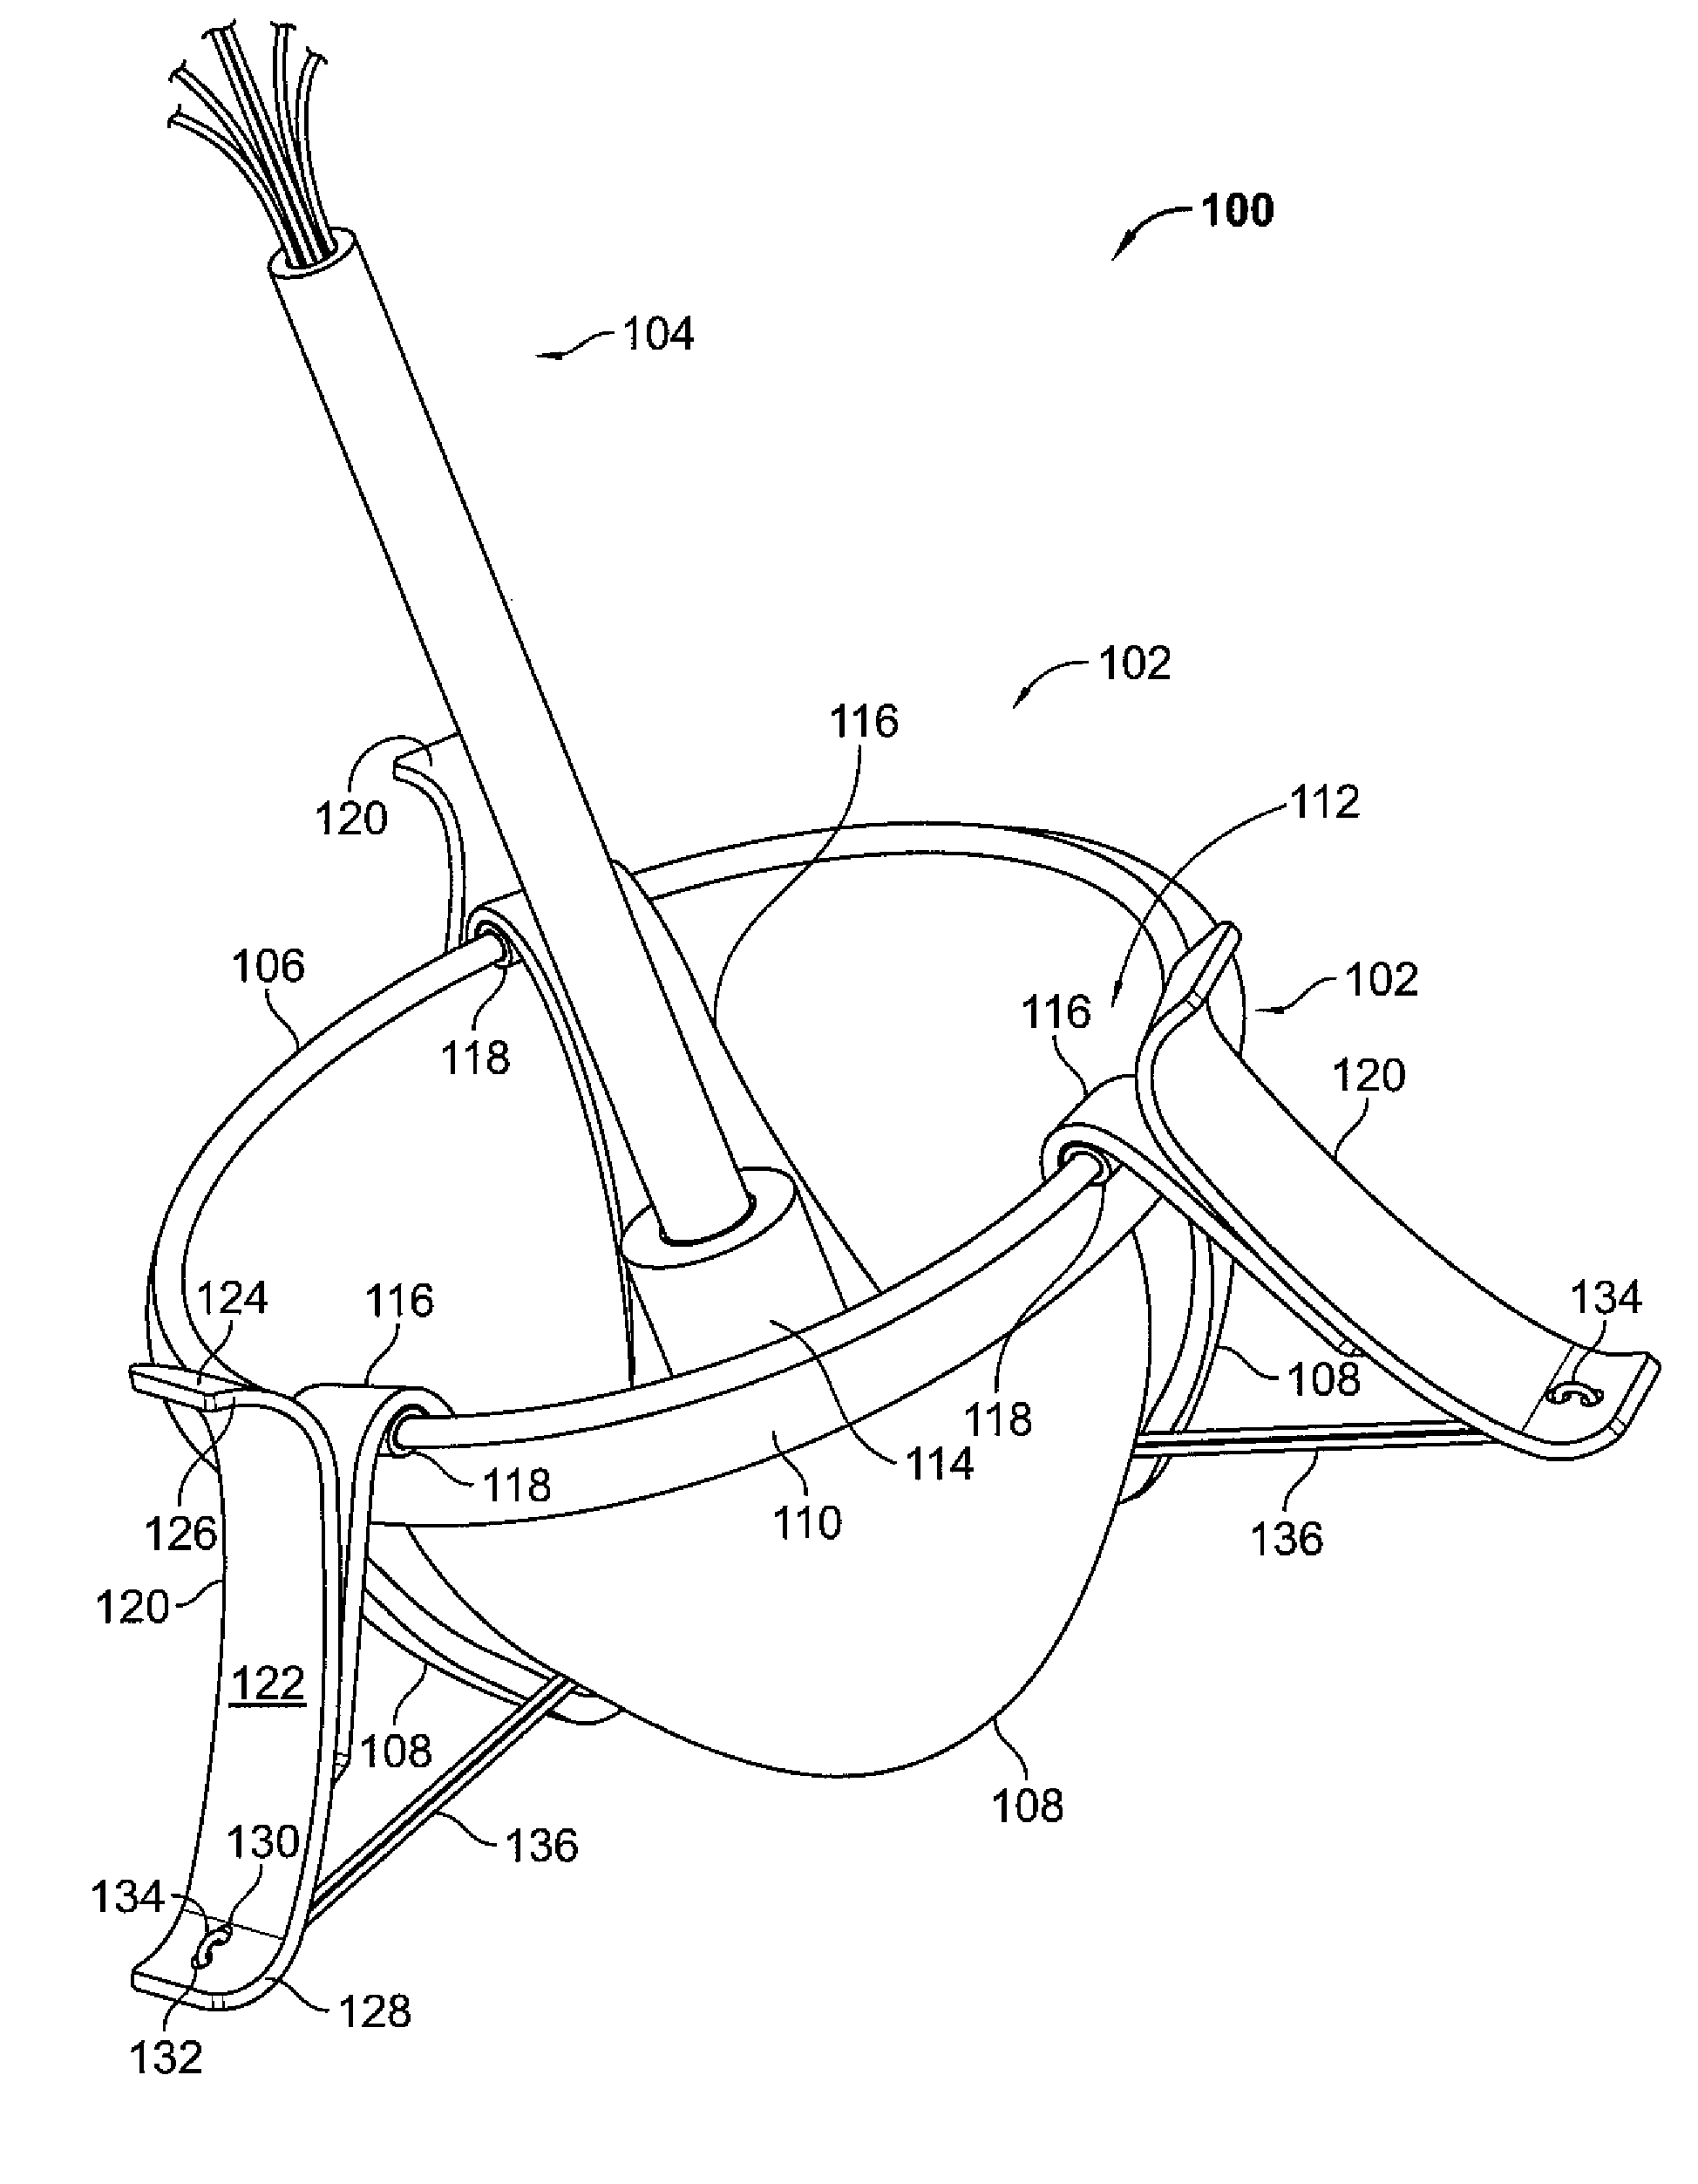 Valve prosthesis systems and methods